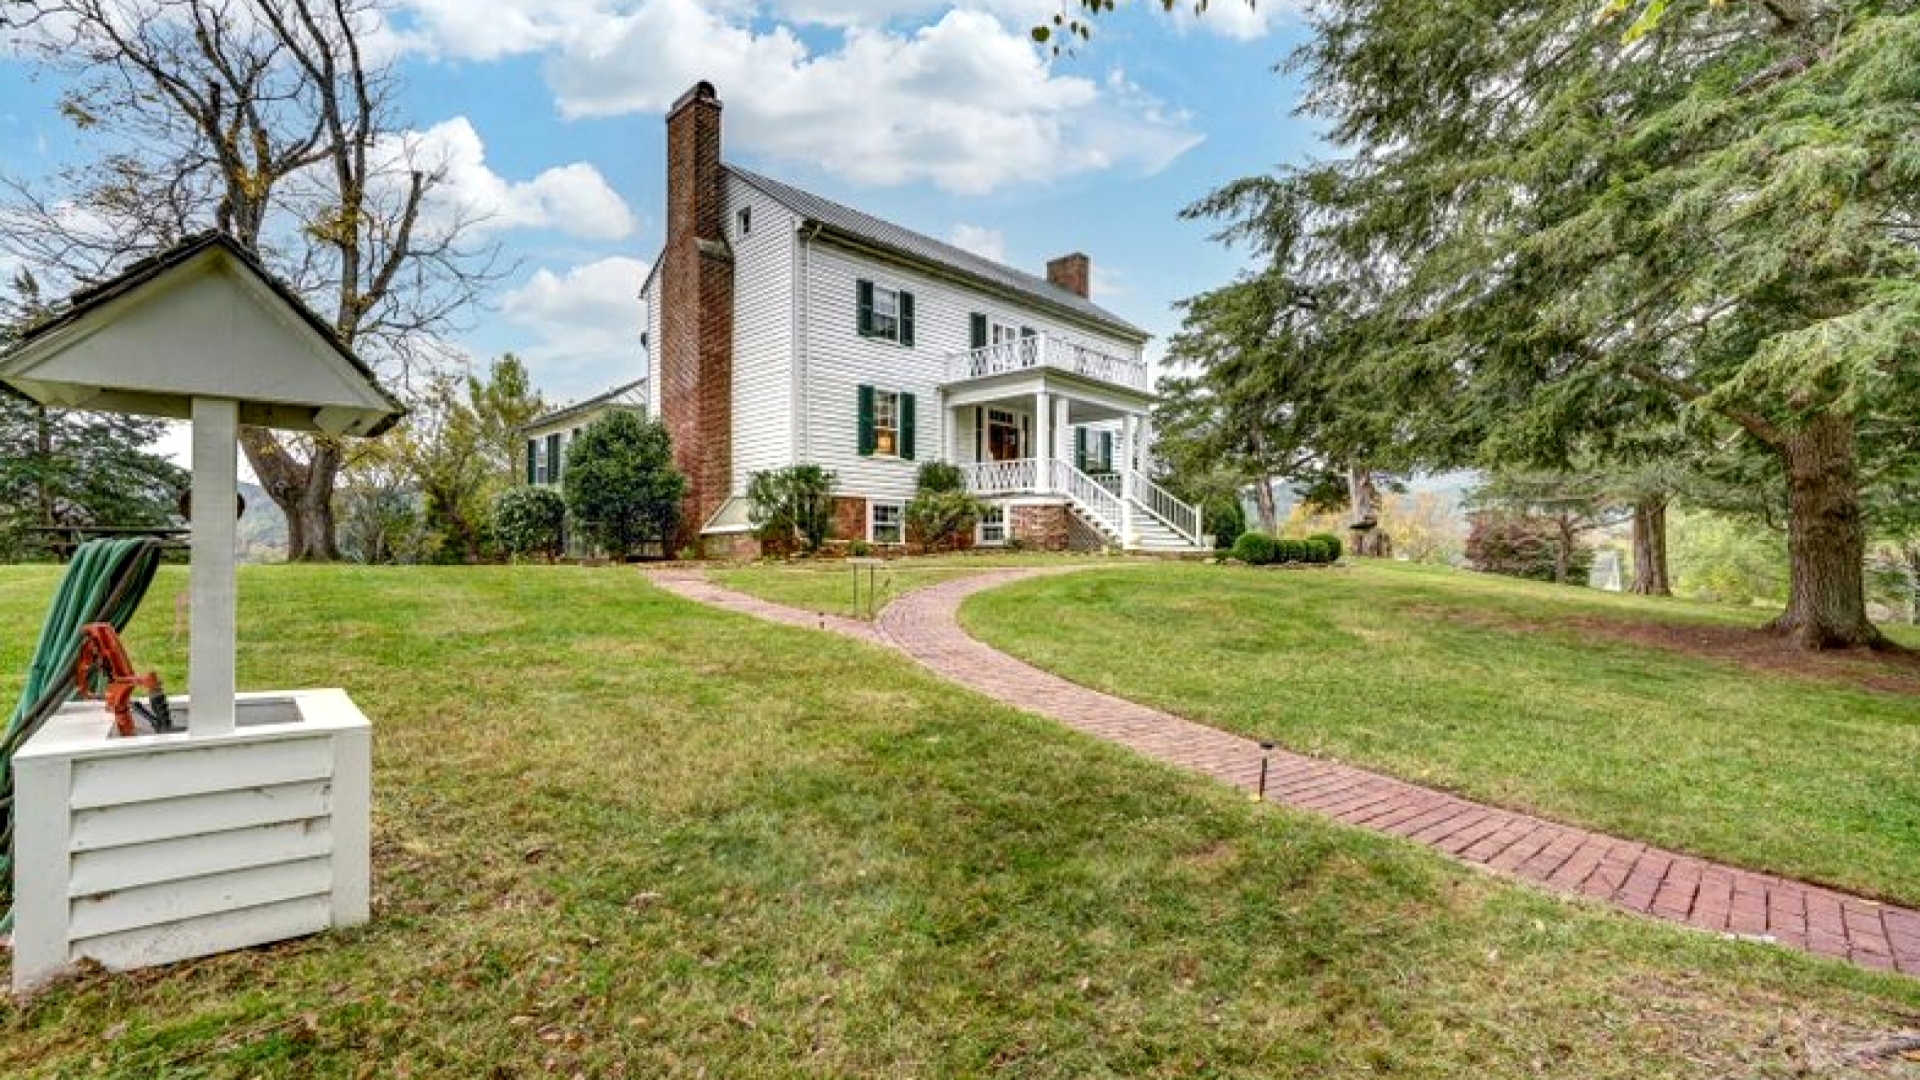  Nelson County VA Historic Home for Sale